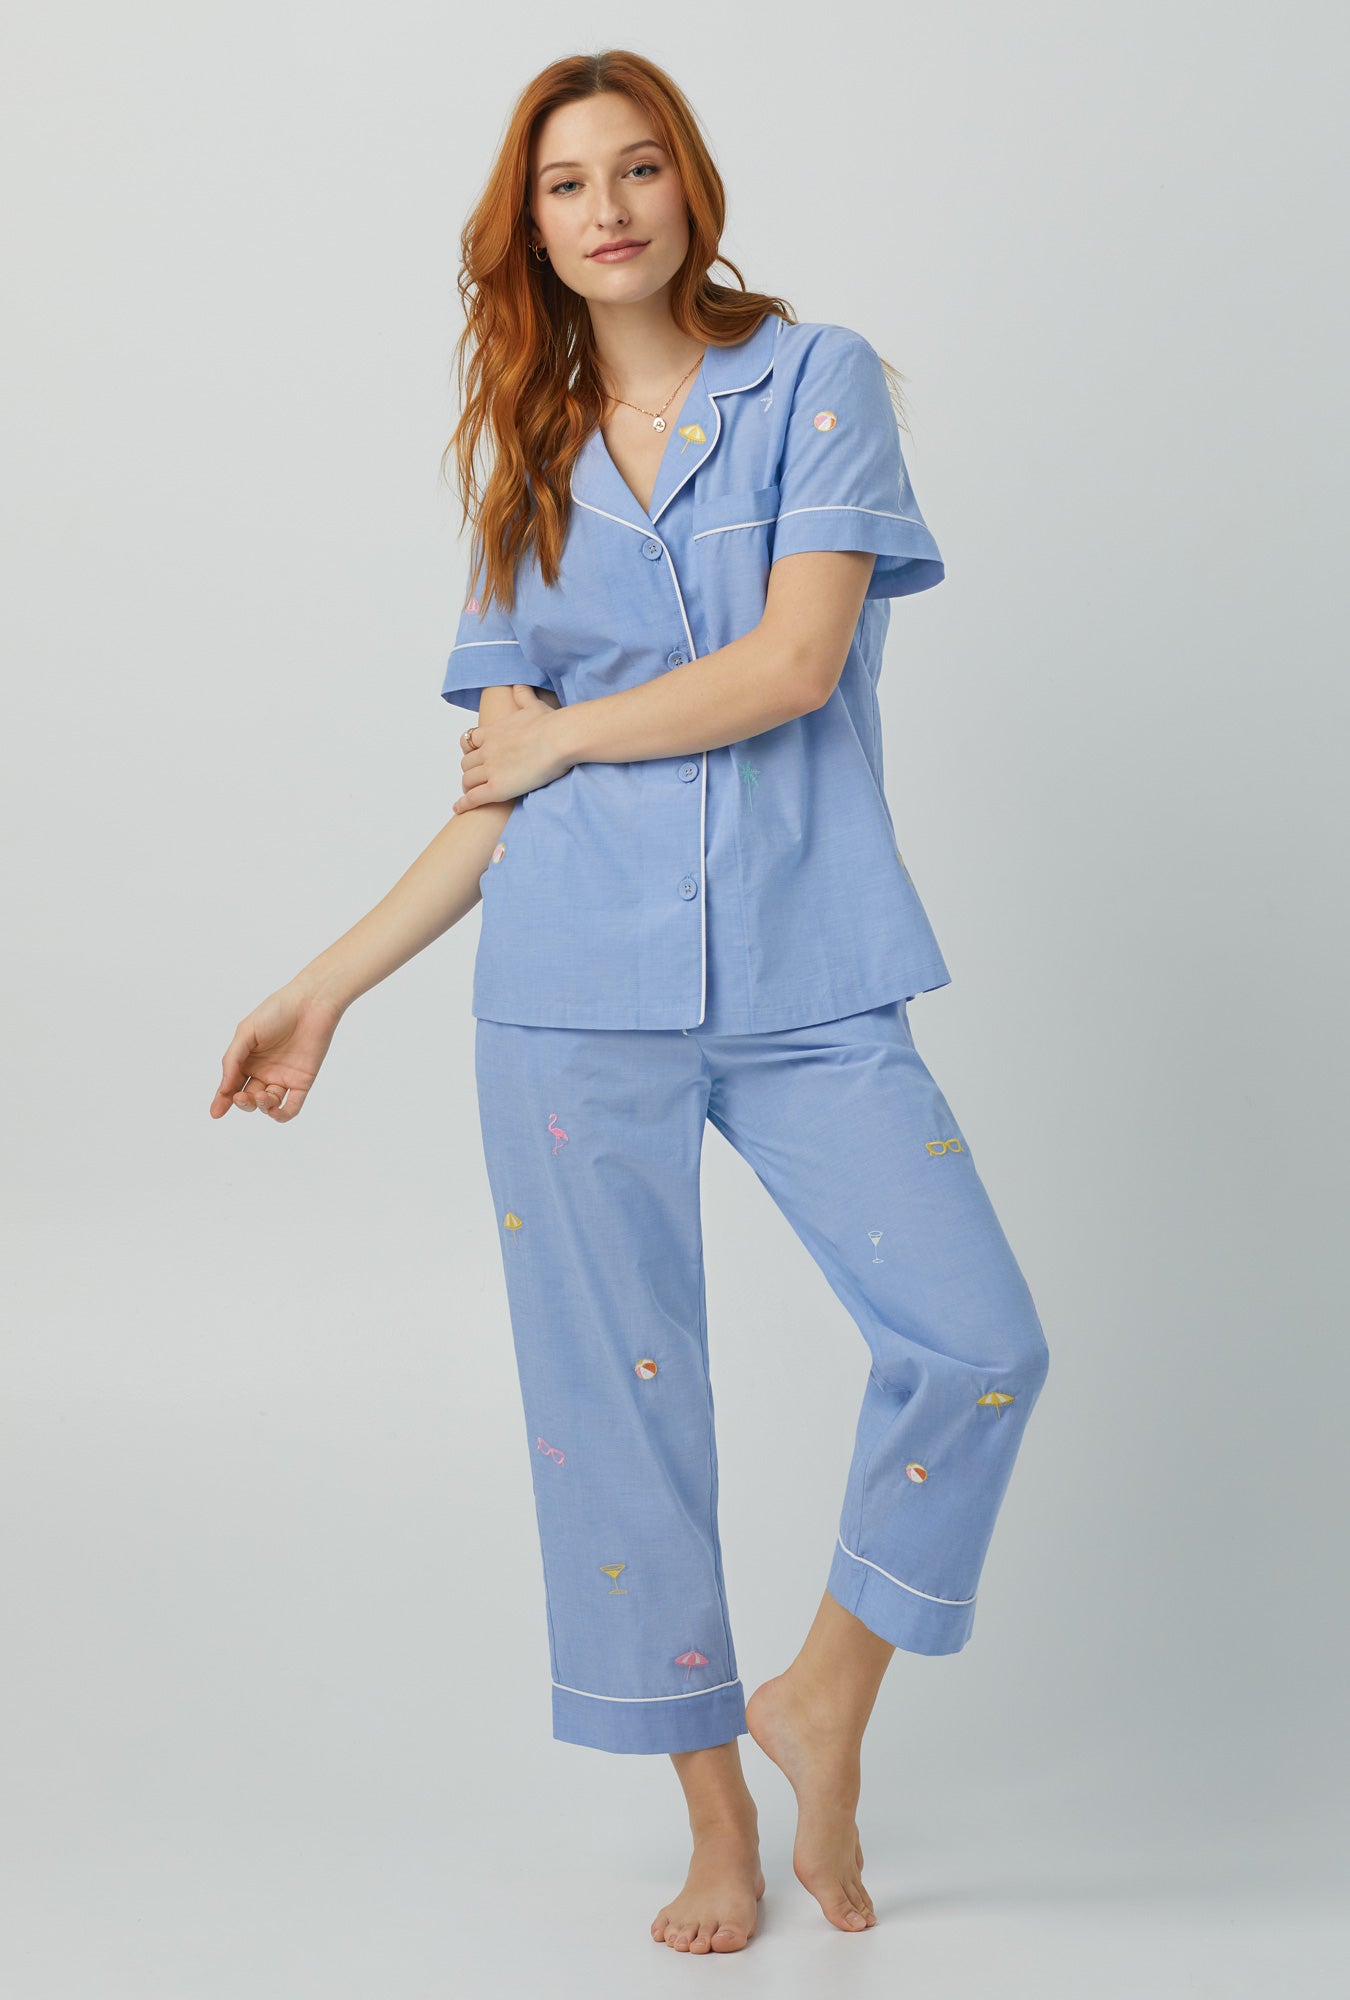 Bed Head Chambray S/S Classic Woven Cotton Poplin Cropped PJ Set